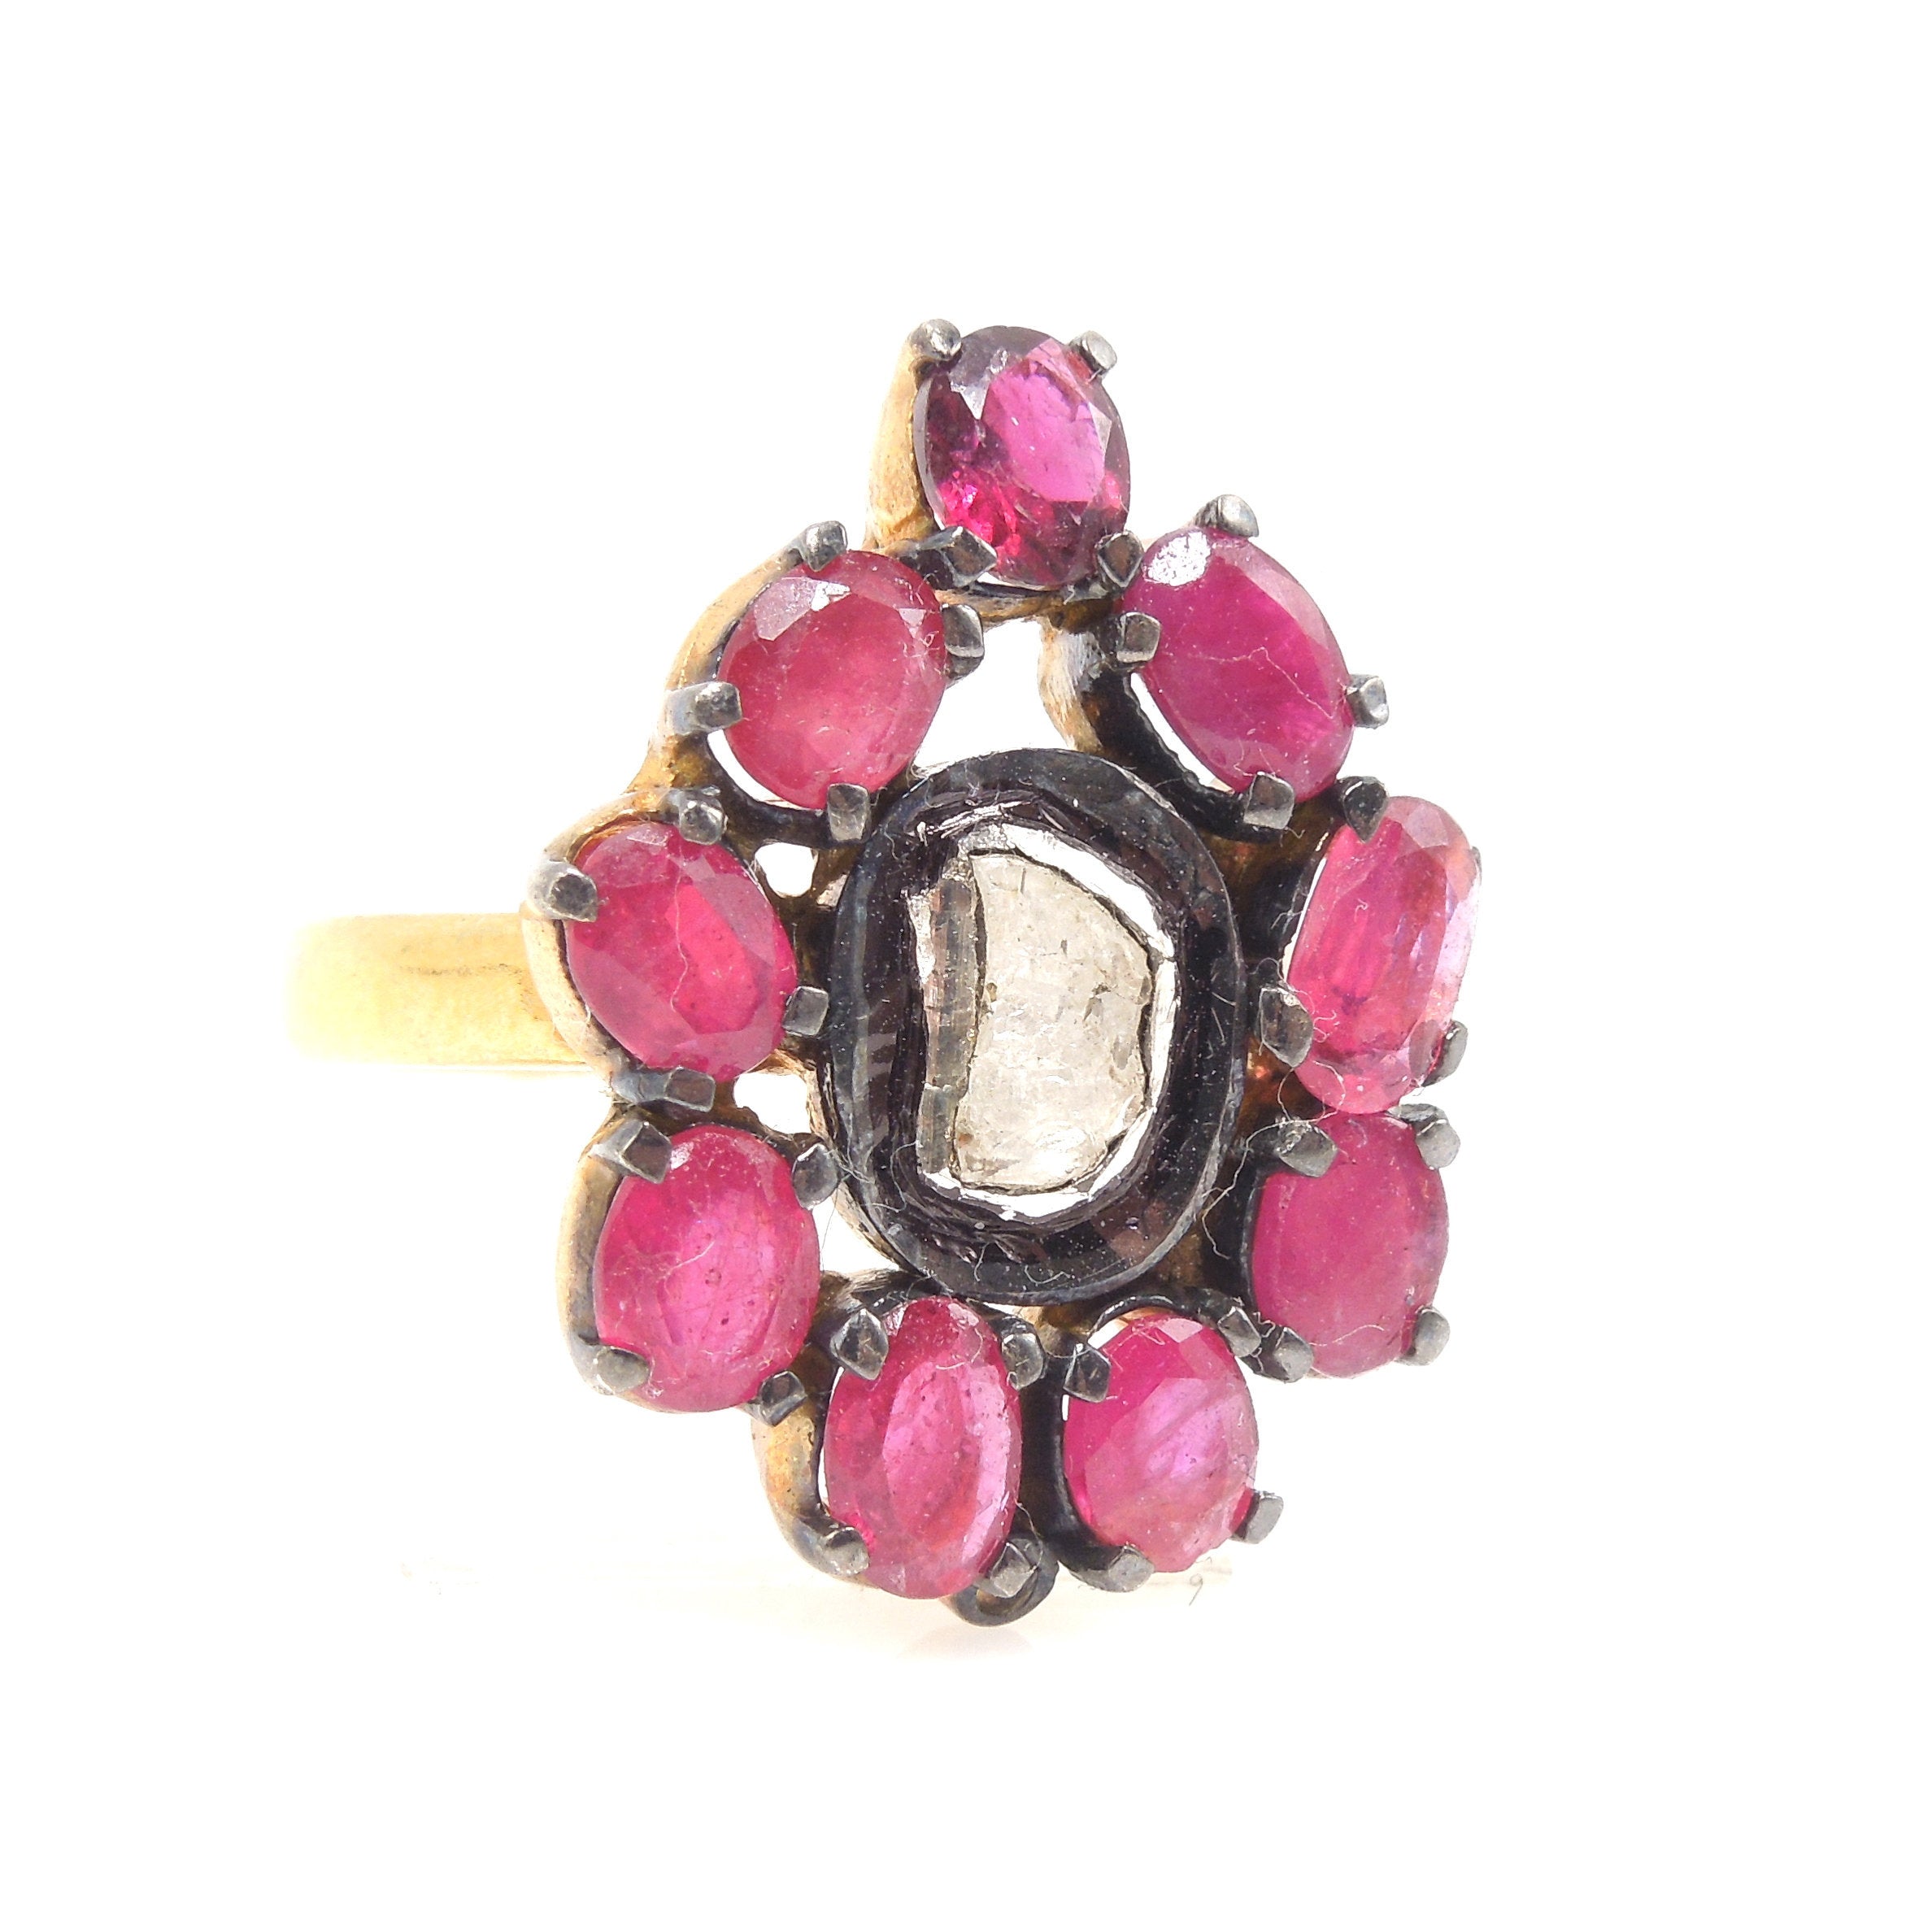 Vermeil Macle Diamond and Ruby Ring - Sterling Silver & Gold